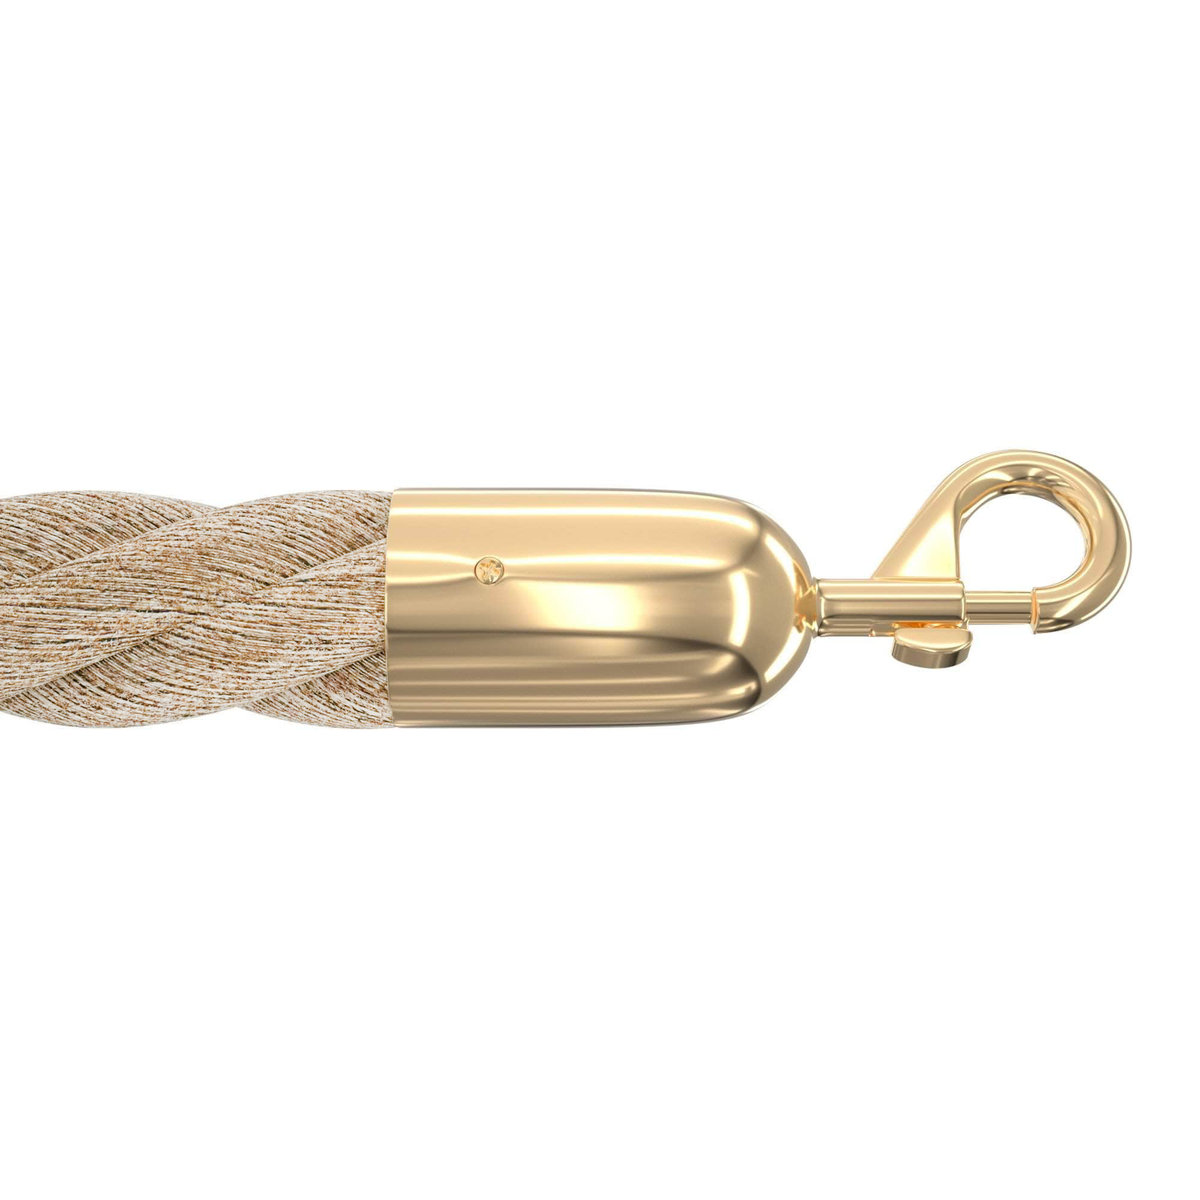 Manho HI-MAN Super Strong Poly-Pro Rope, Firm Lay *Special*